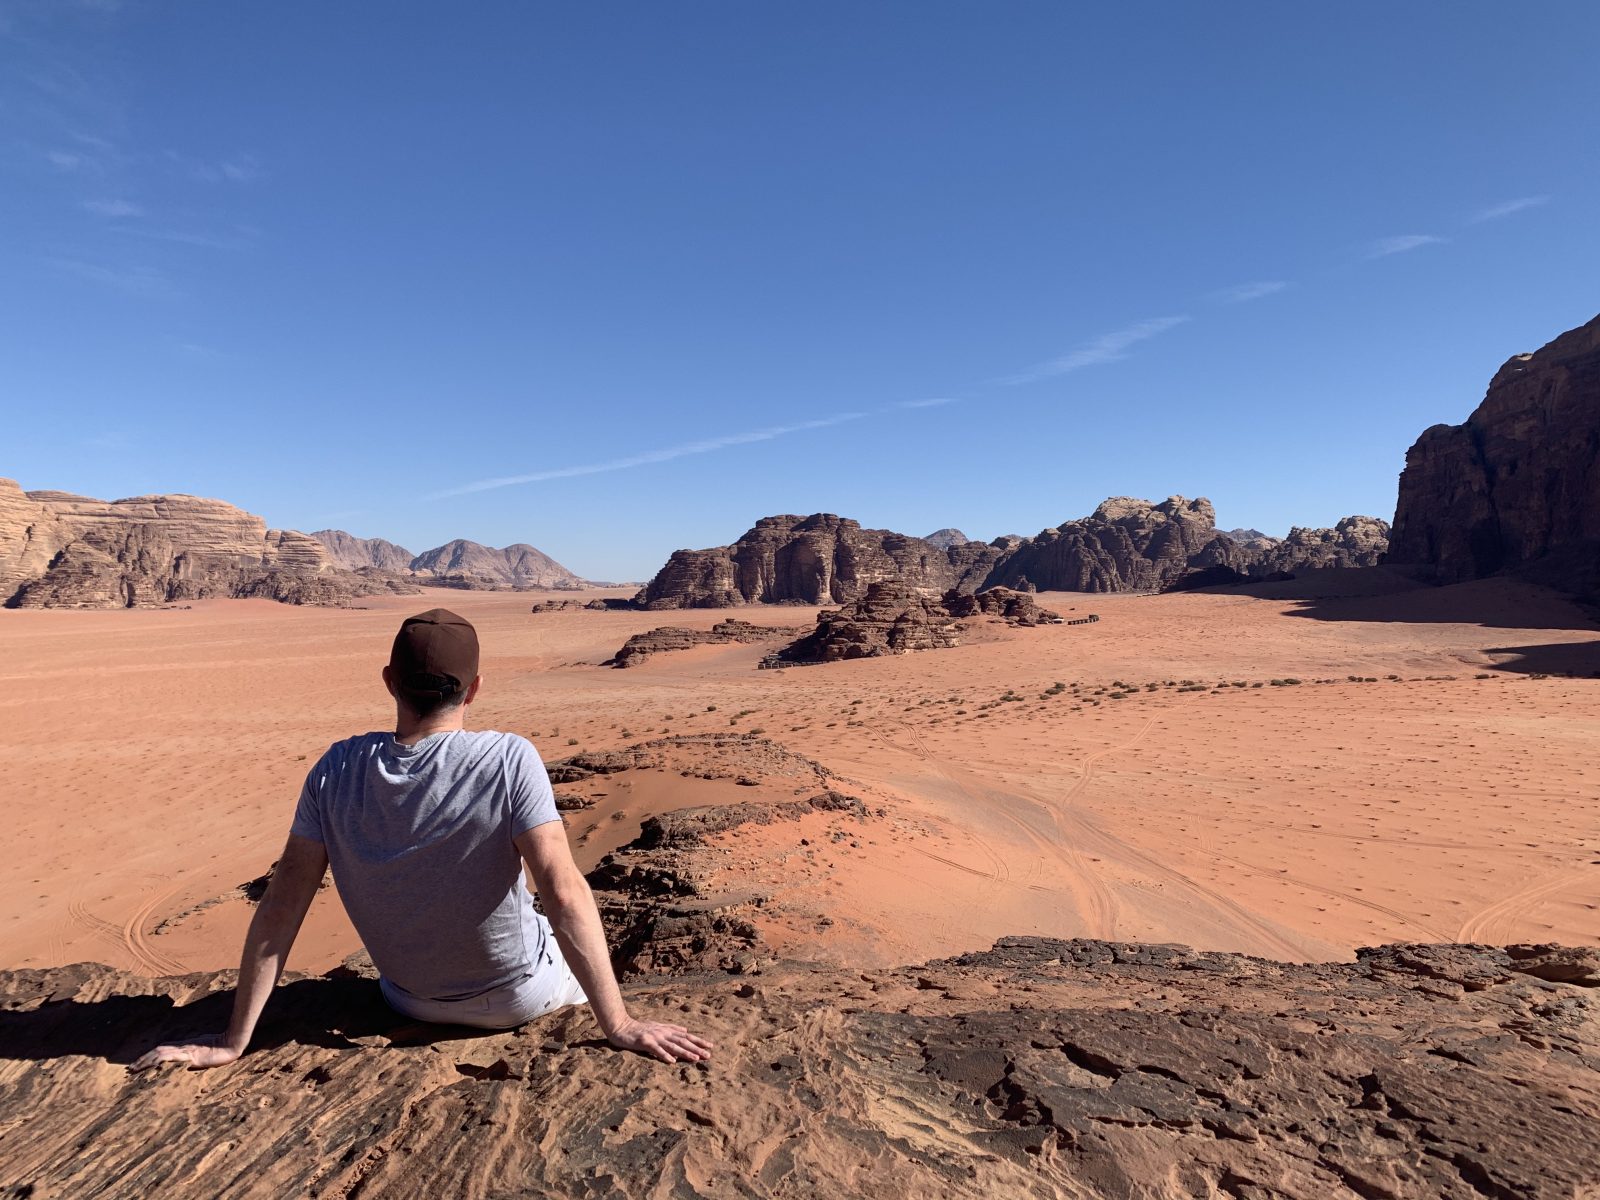 4WDing around Wadi Rum and spending a night in a desert camp